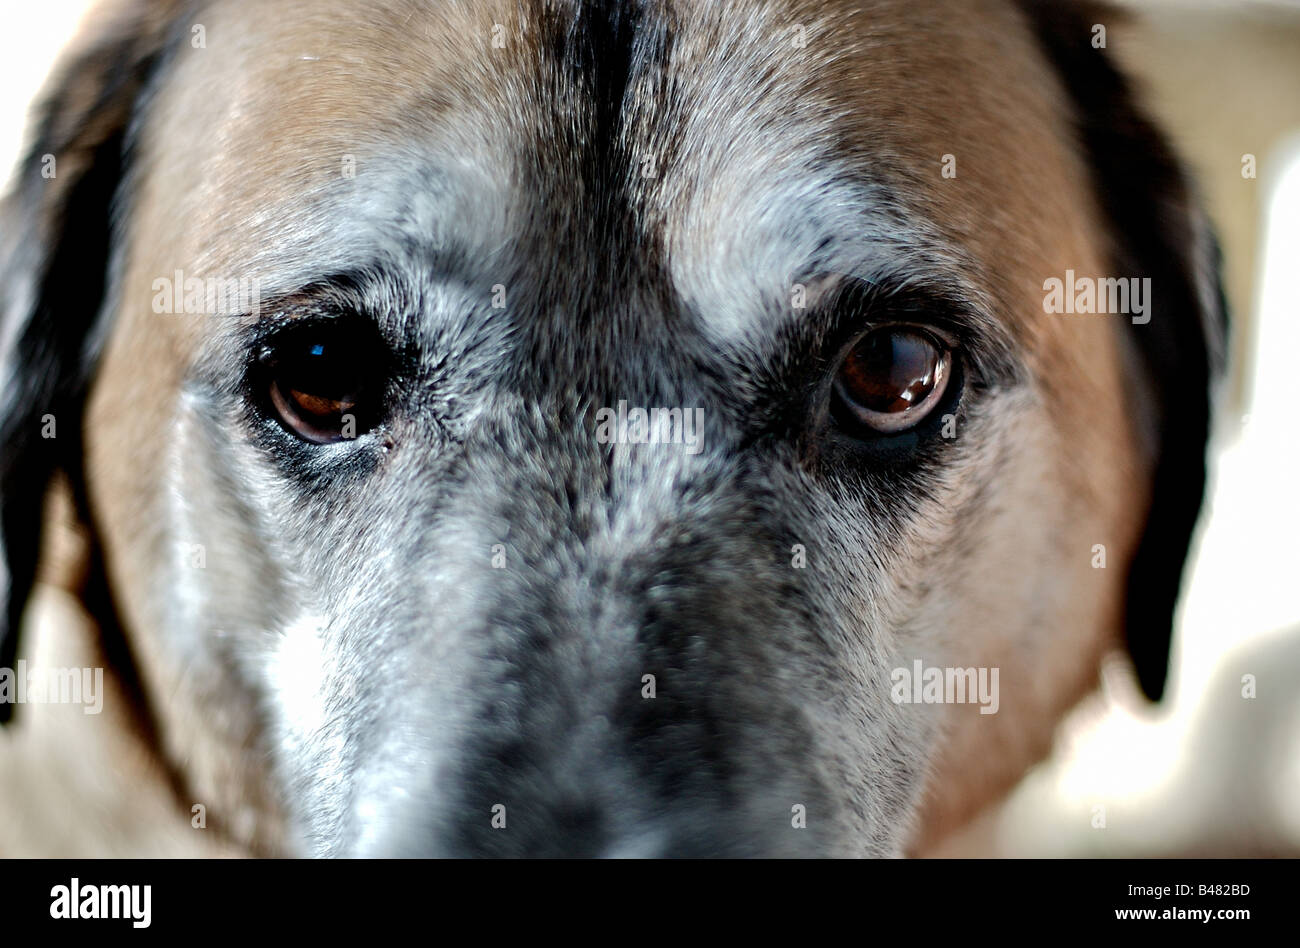 Close-up of an old dog with intense eyes Stock Photo